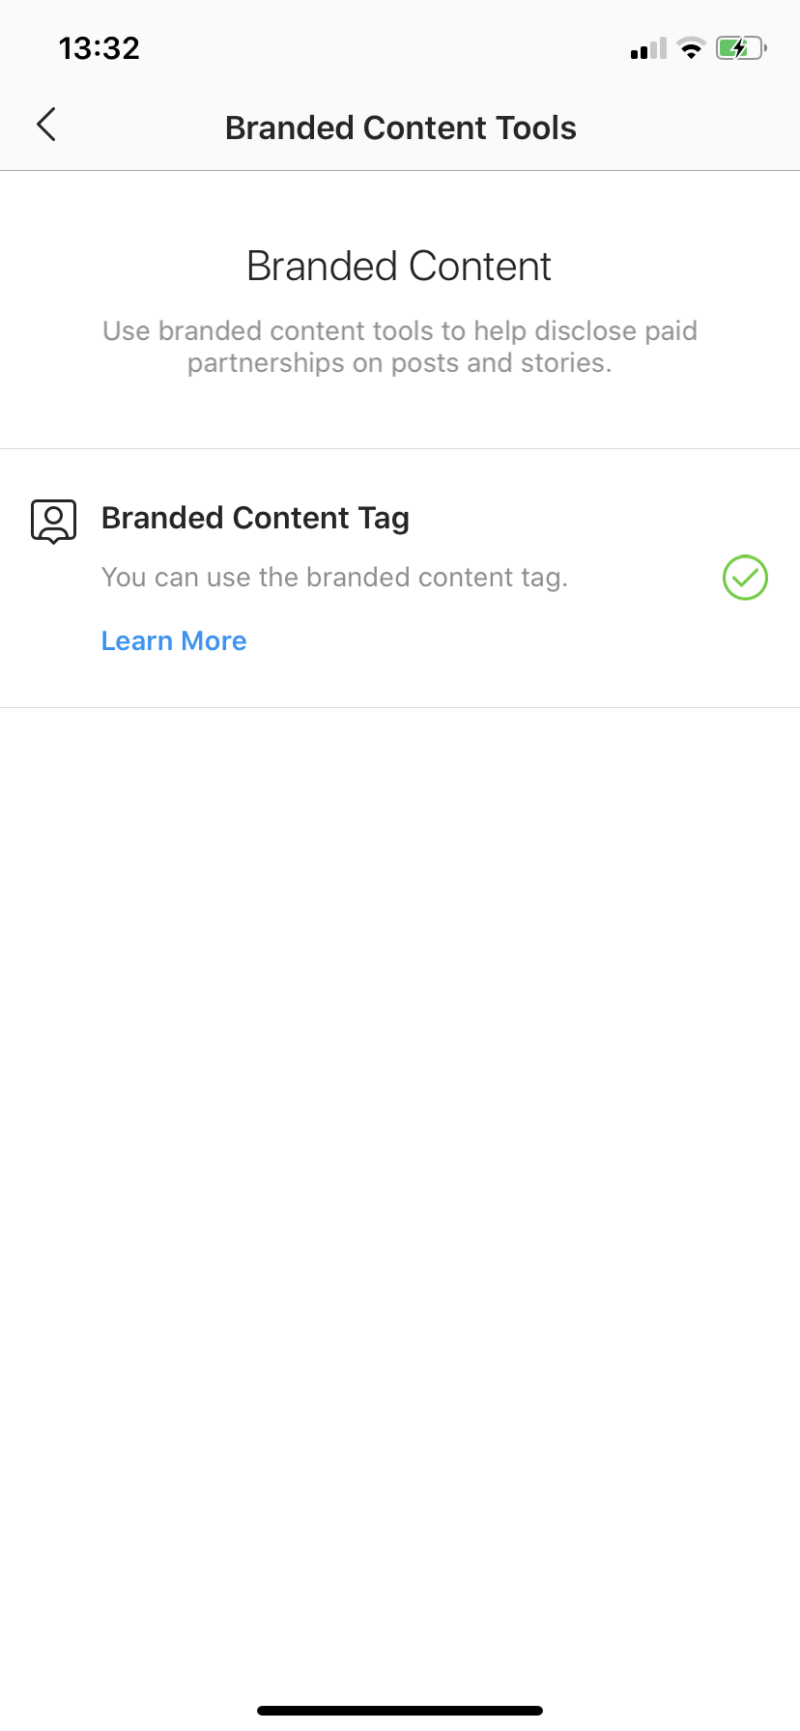 Check branded content tools eligibility